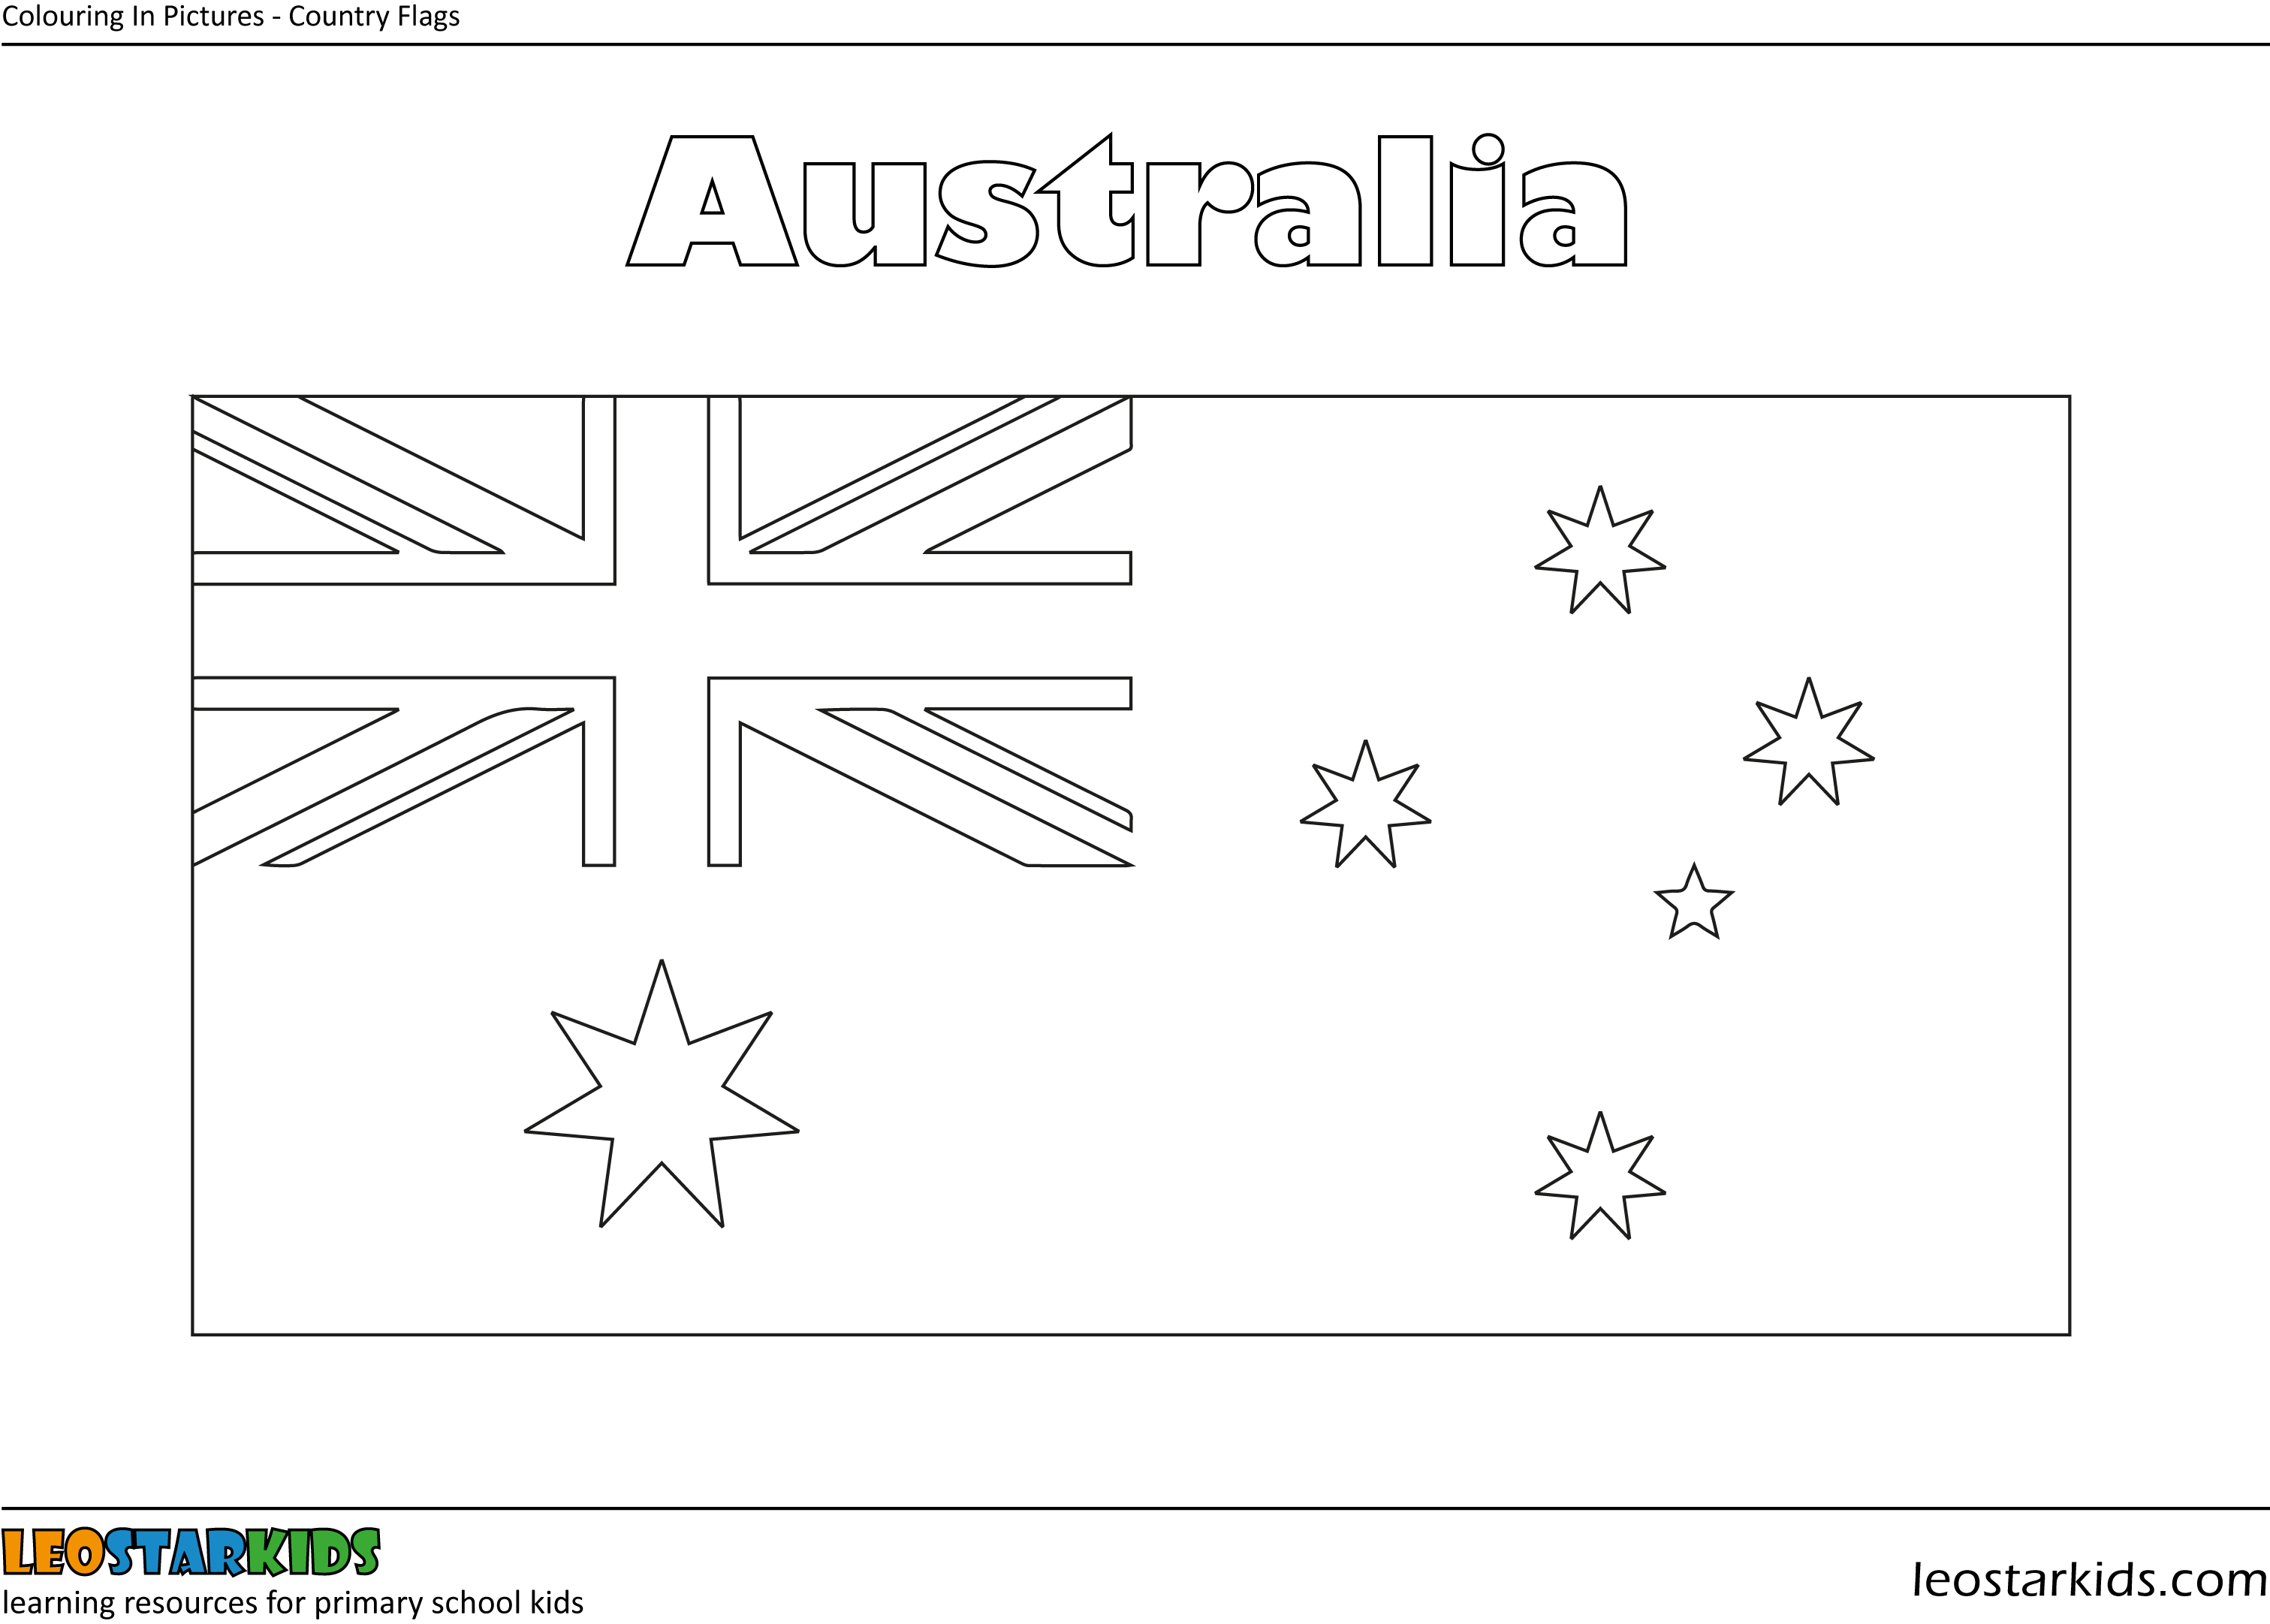 Colouring In Pictures National Flags LEOSTARKIDS